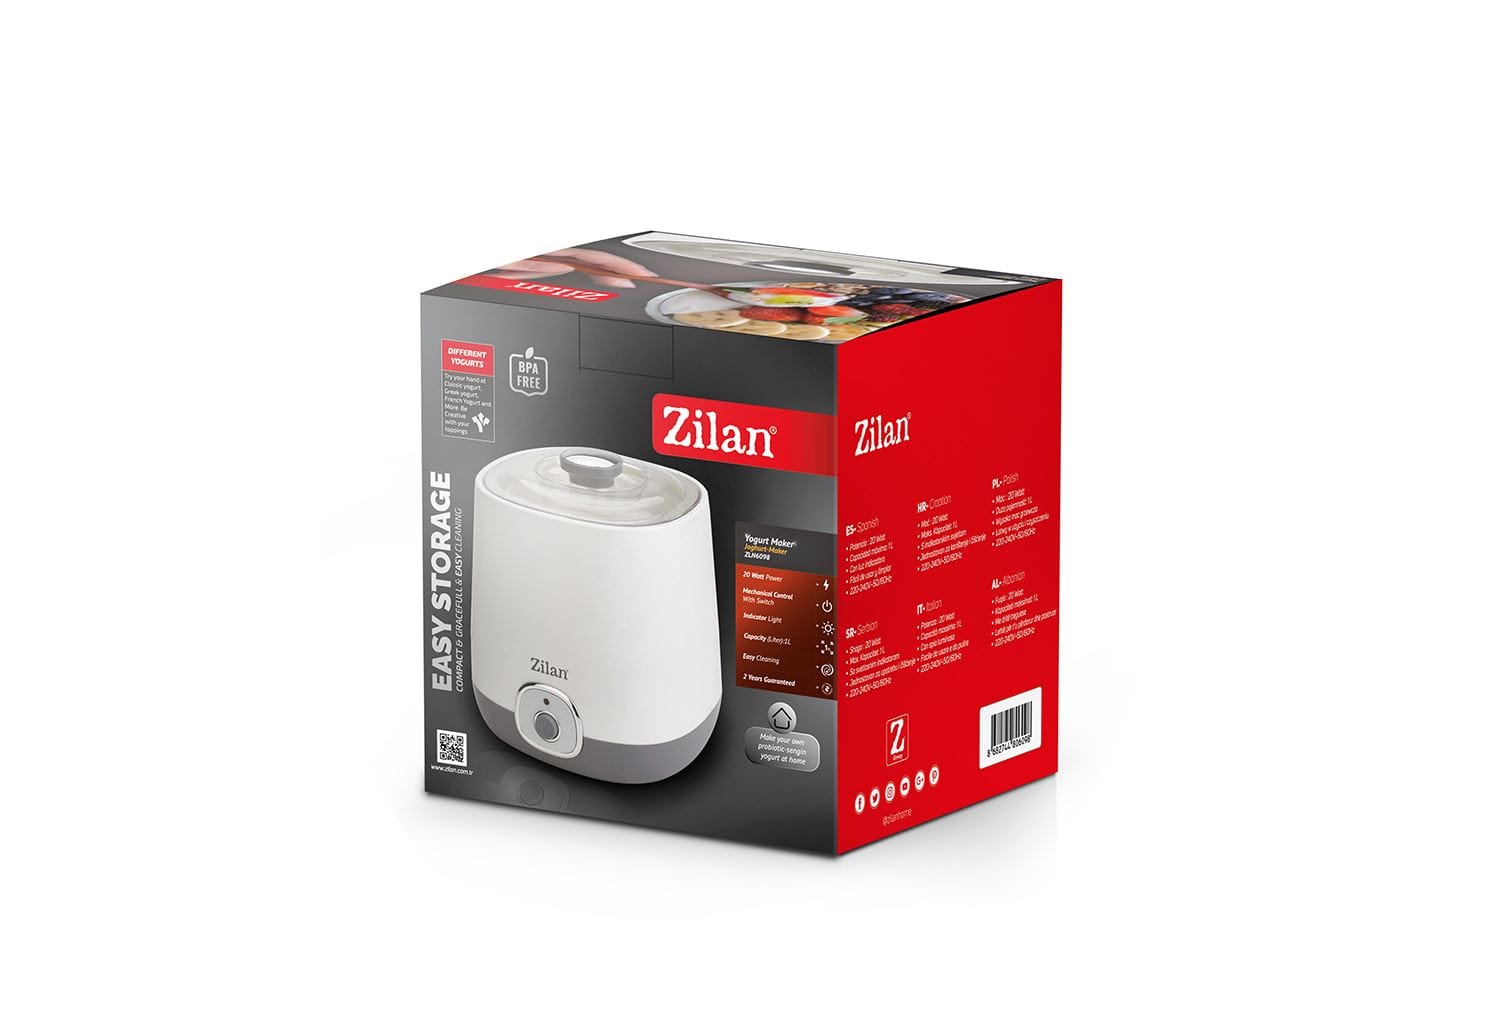 Buy Zilan 1.5L Rice Cooker 500W - ZLN2793 | Supply Master Accra, Ghana Kitchen Appliances Buy Tools hardware Building materials